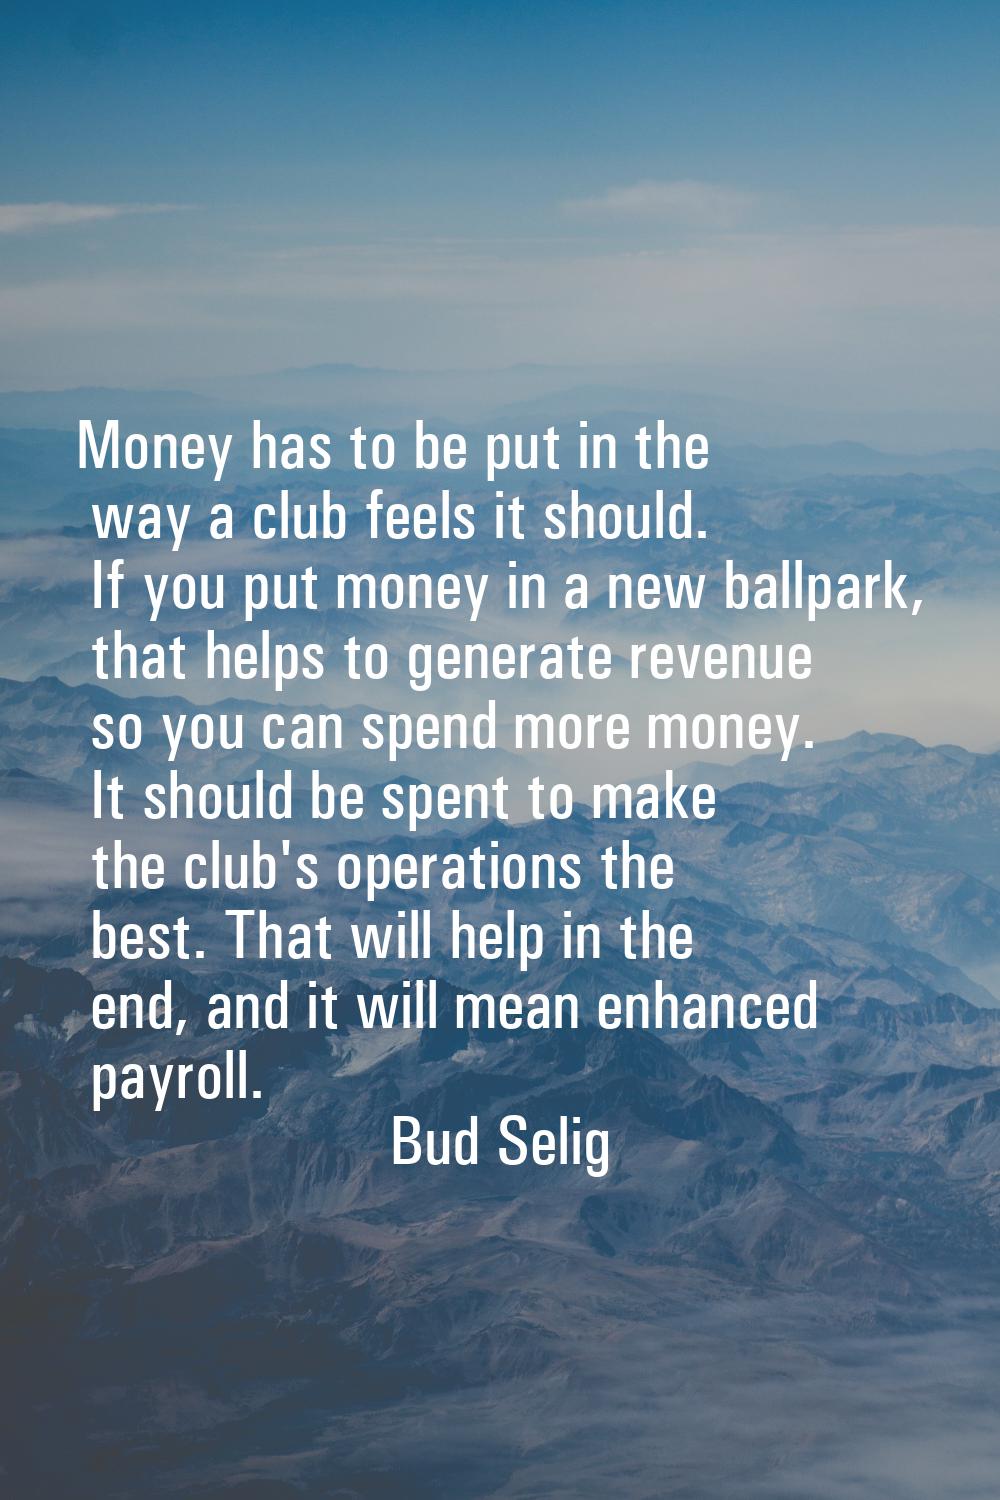 Money has to be put in the way a club feels it should. If you put money in a new ballpark, that hel